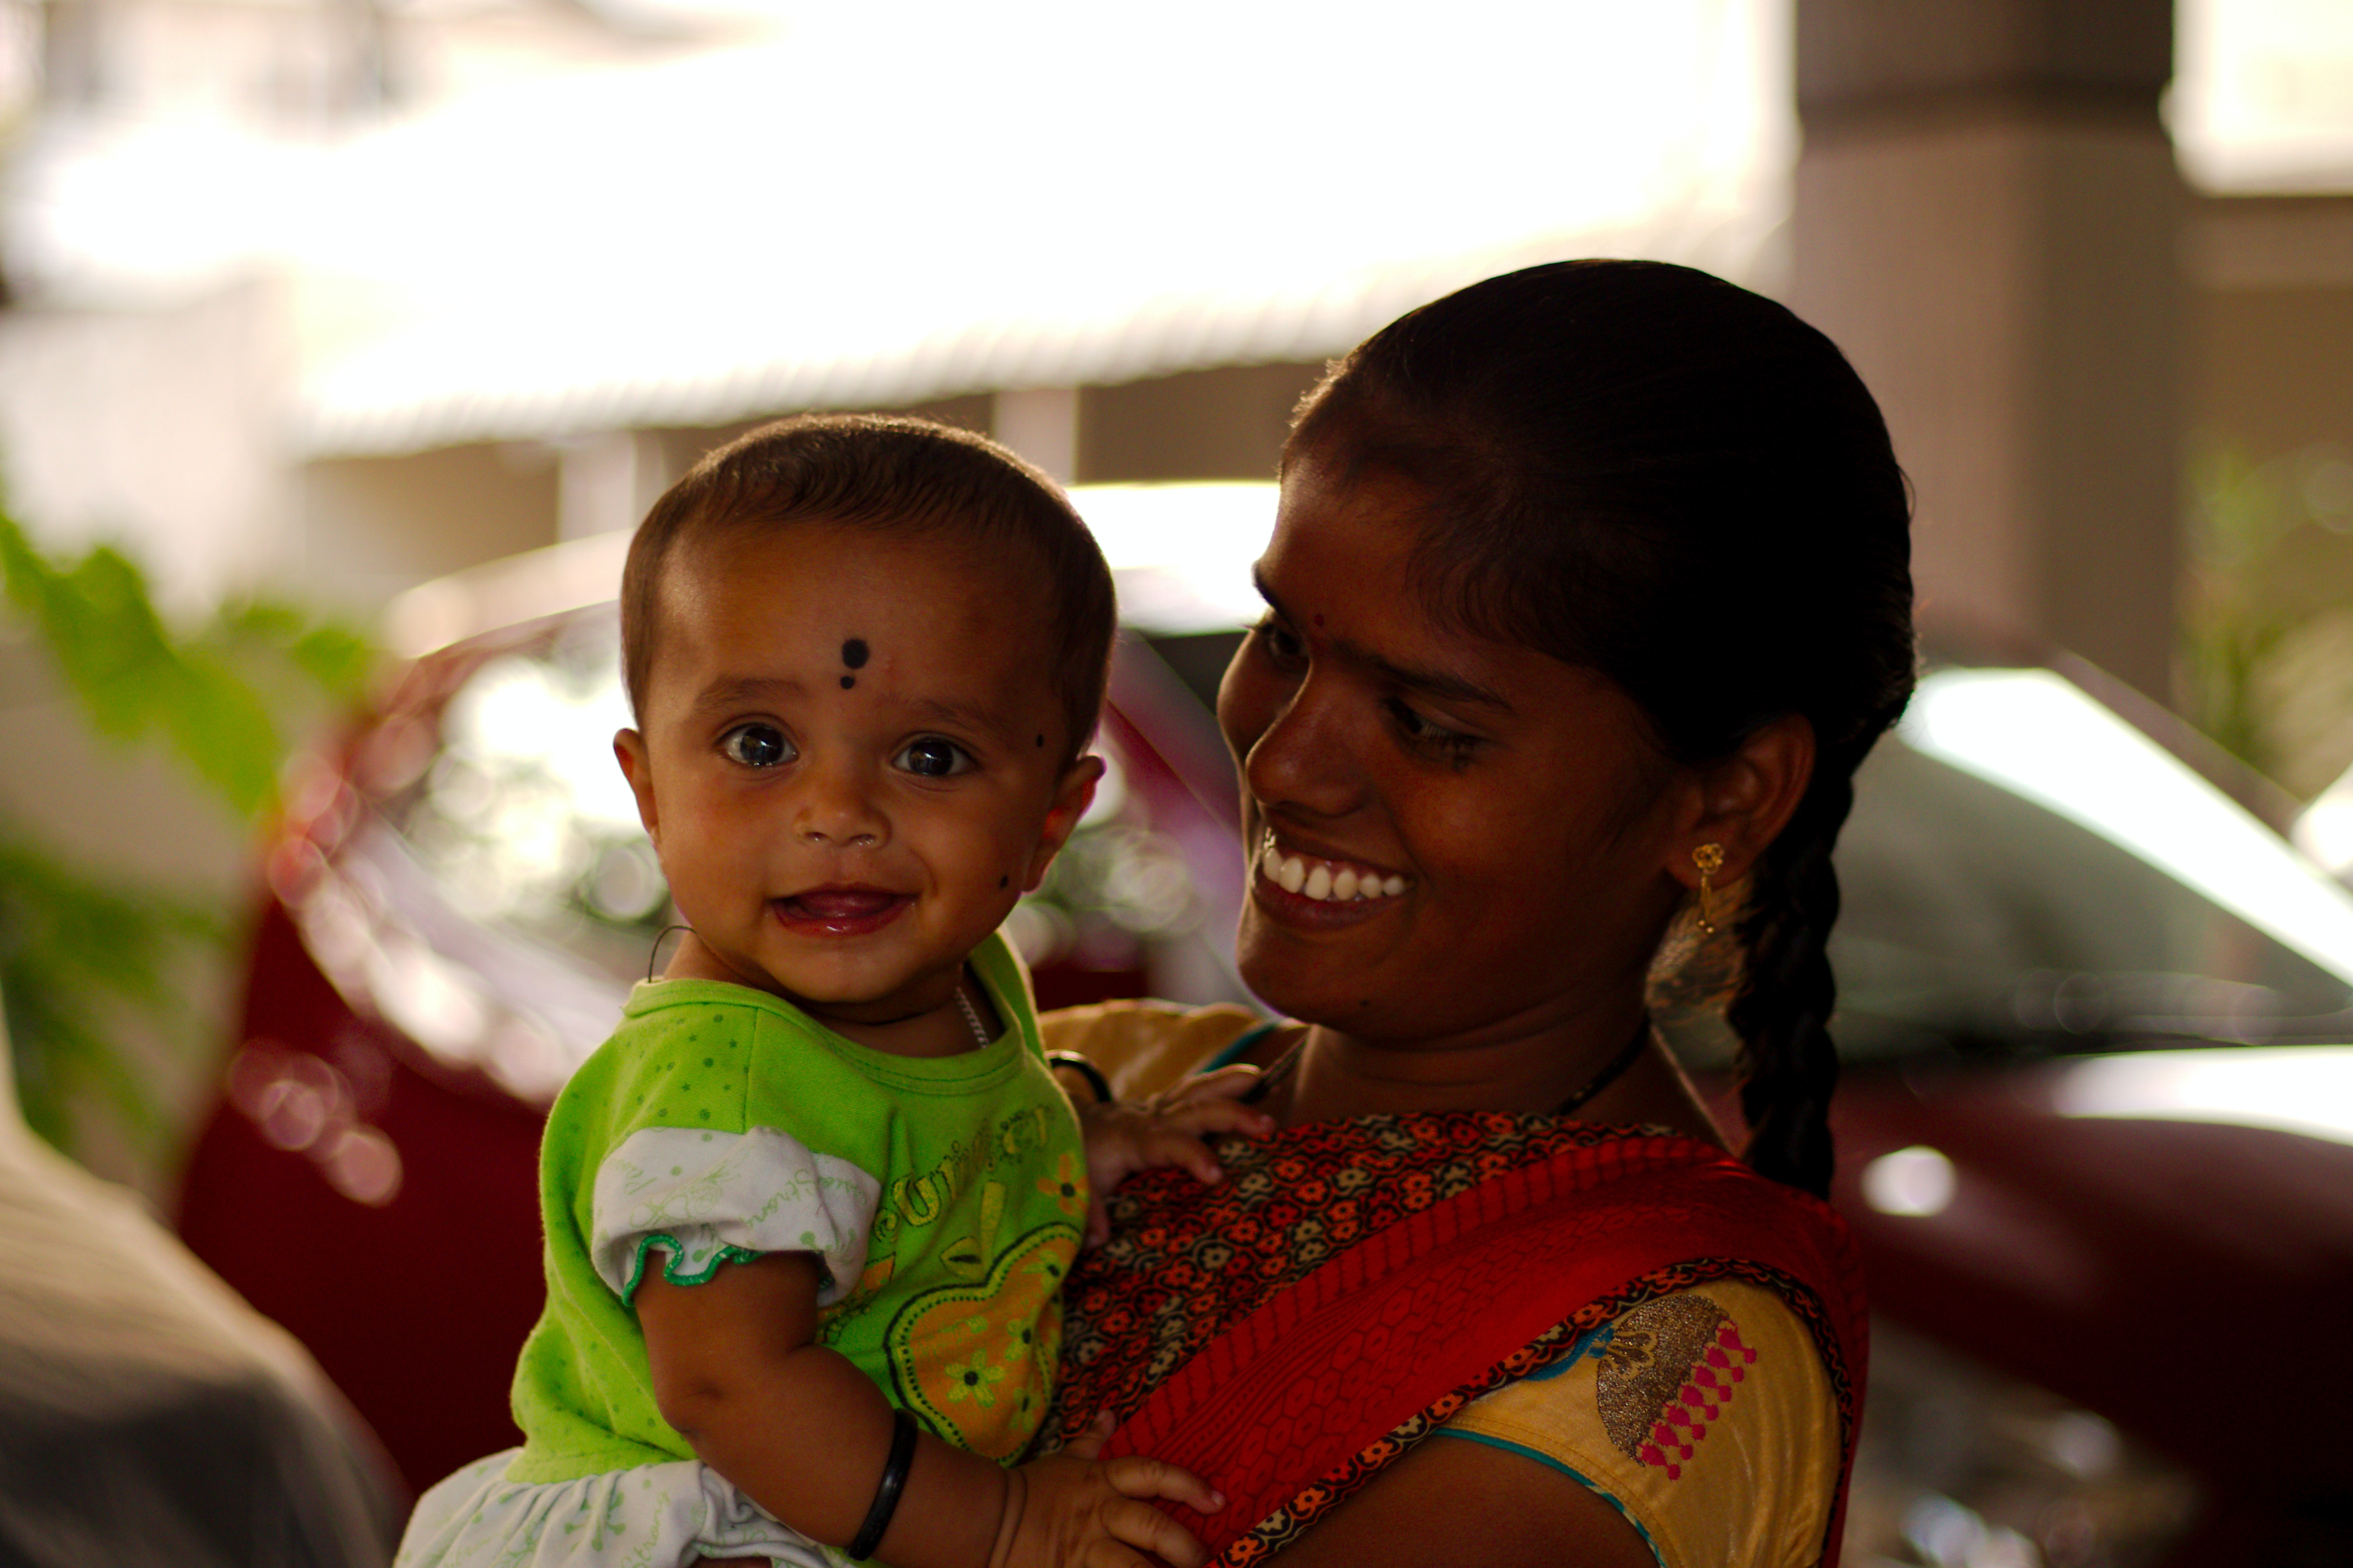 Mother and child in India